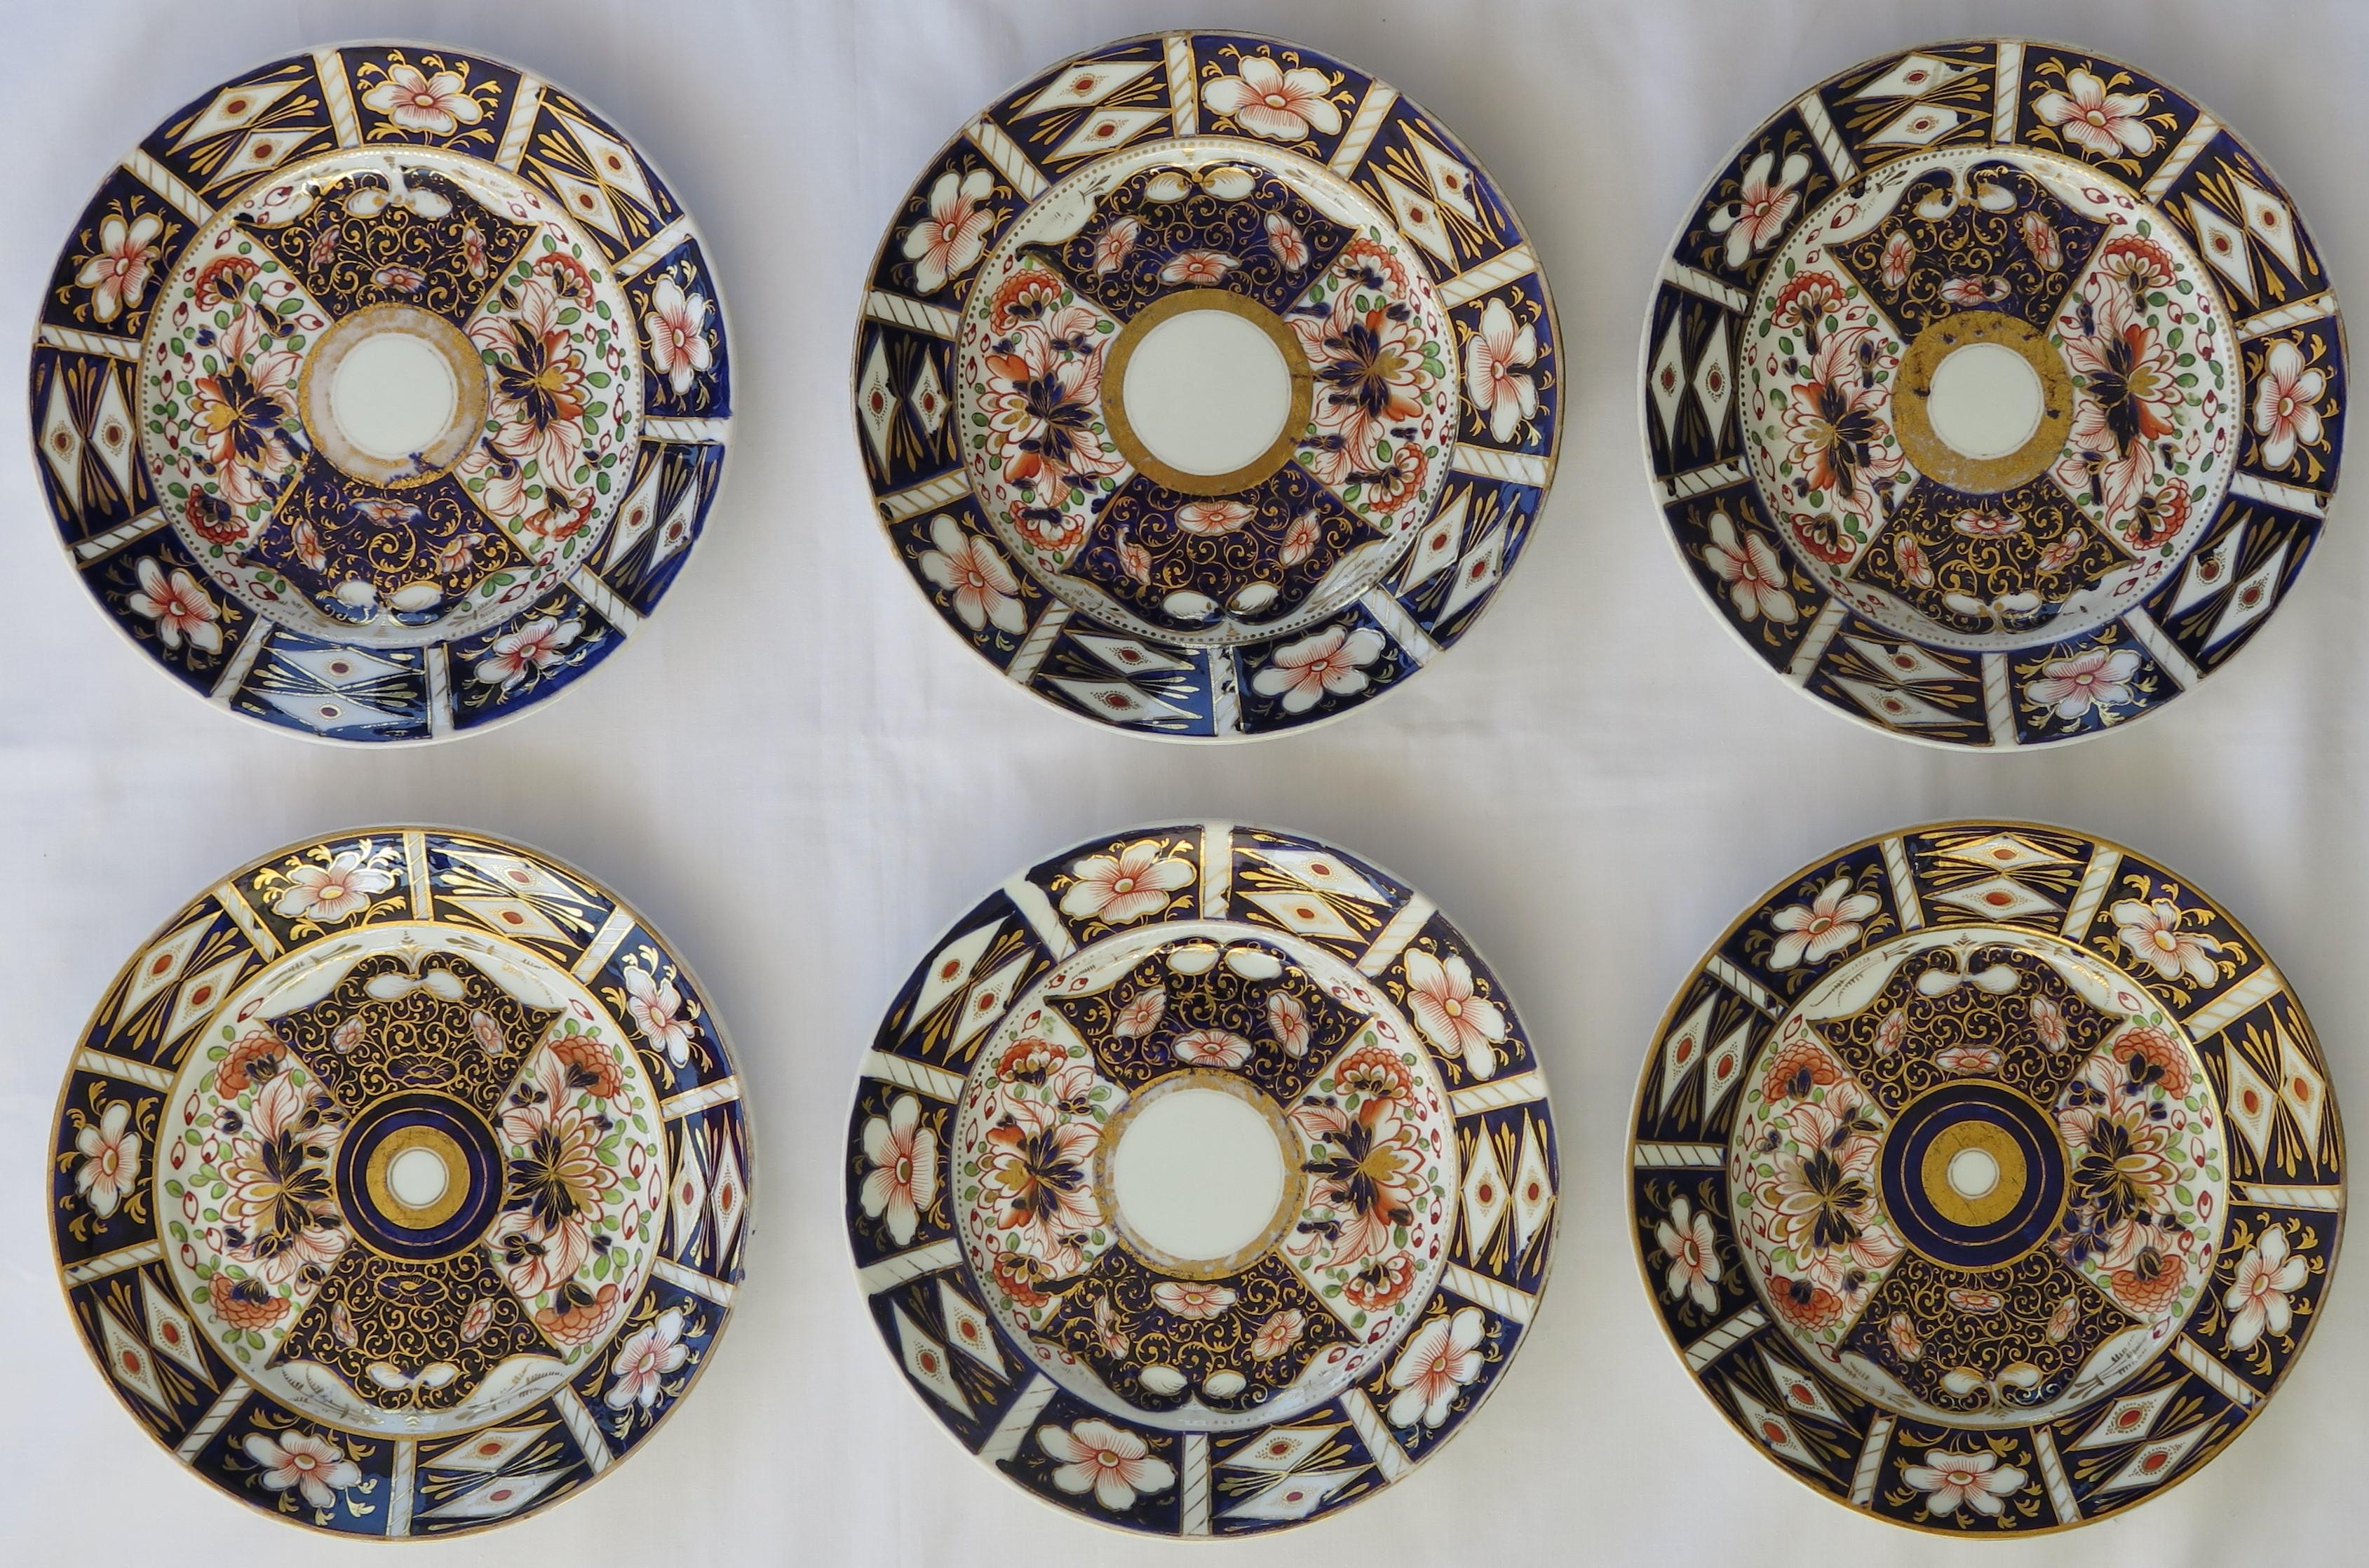 This is a good set of six porcelain plates, all hand painted and gilded, attributed to the Davenport Company of Longport, Staffordshire Potteries, England, dating to the 19th century, Victorian period, circa 1870.

The plates are circular in form